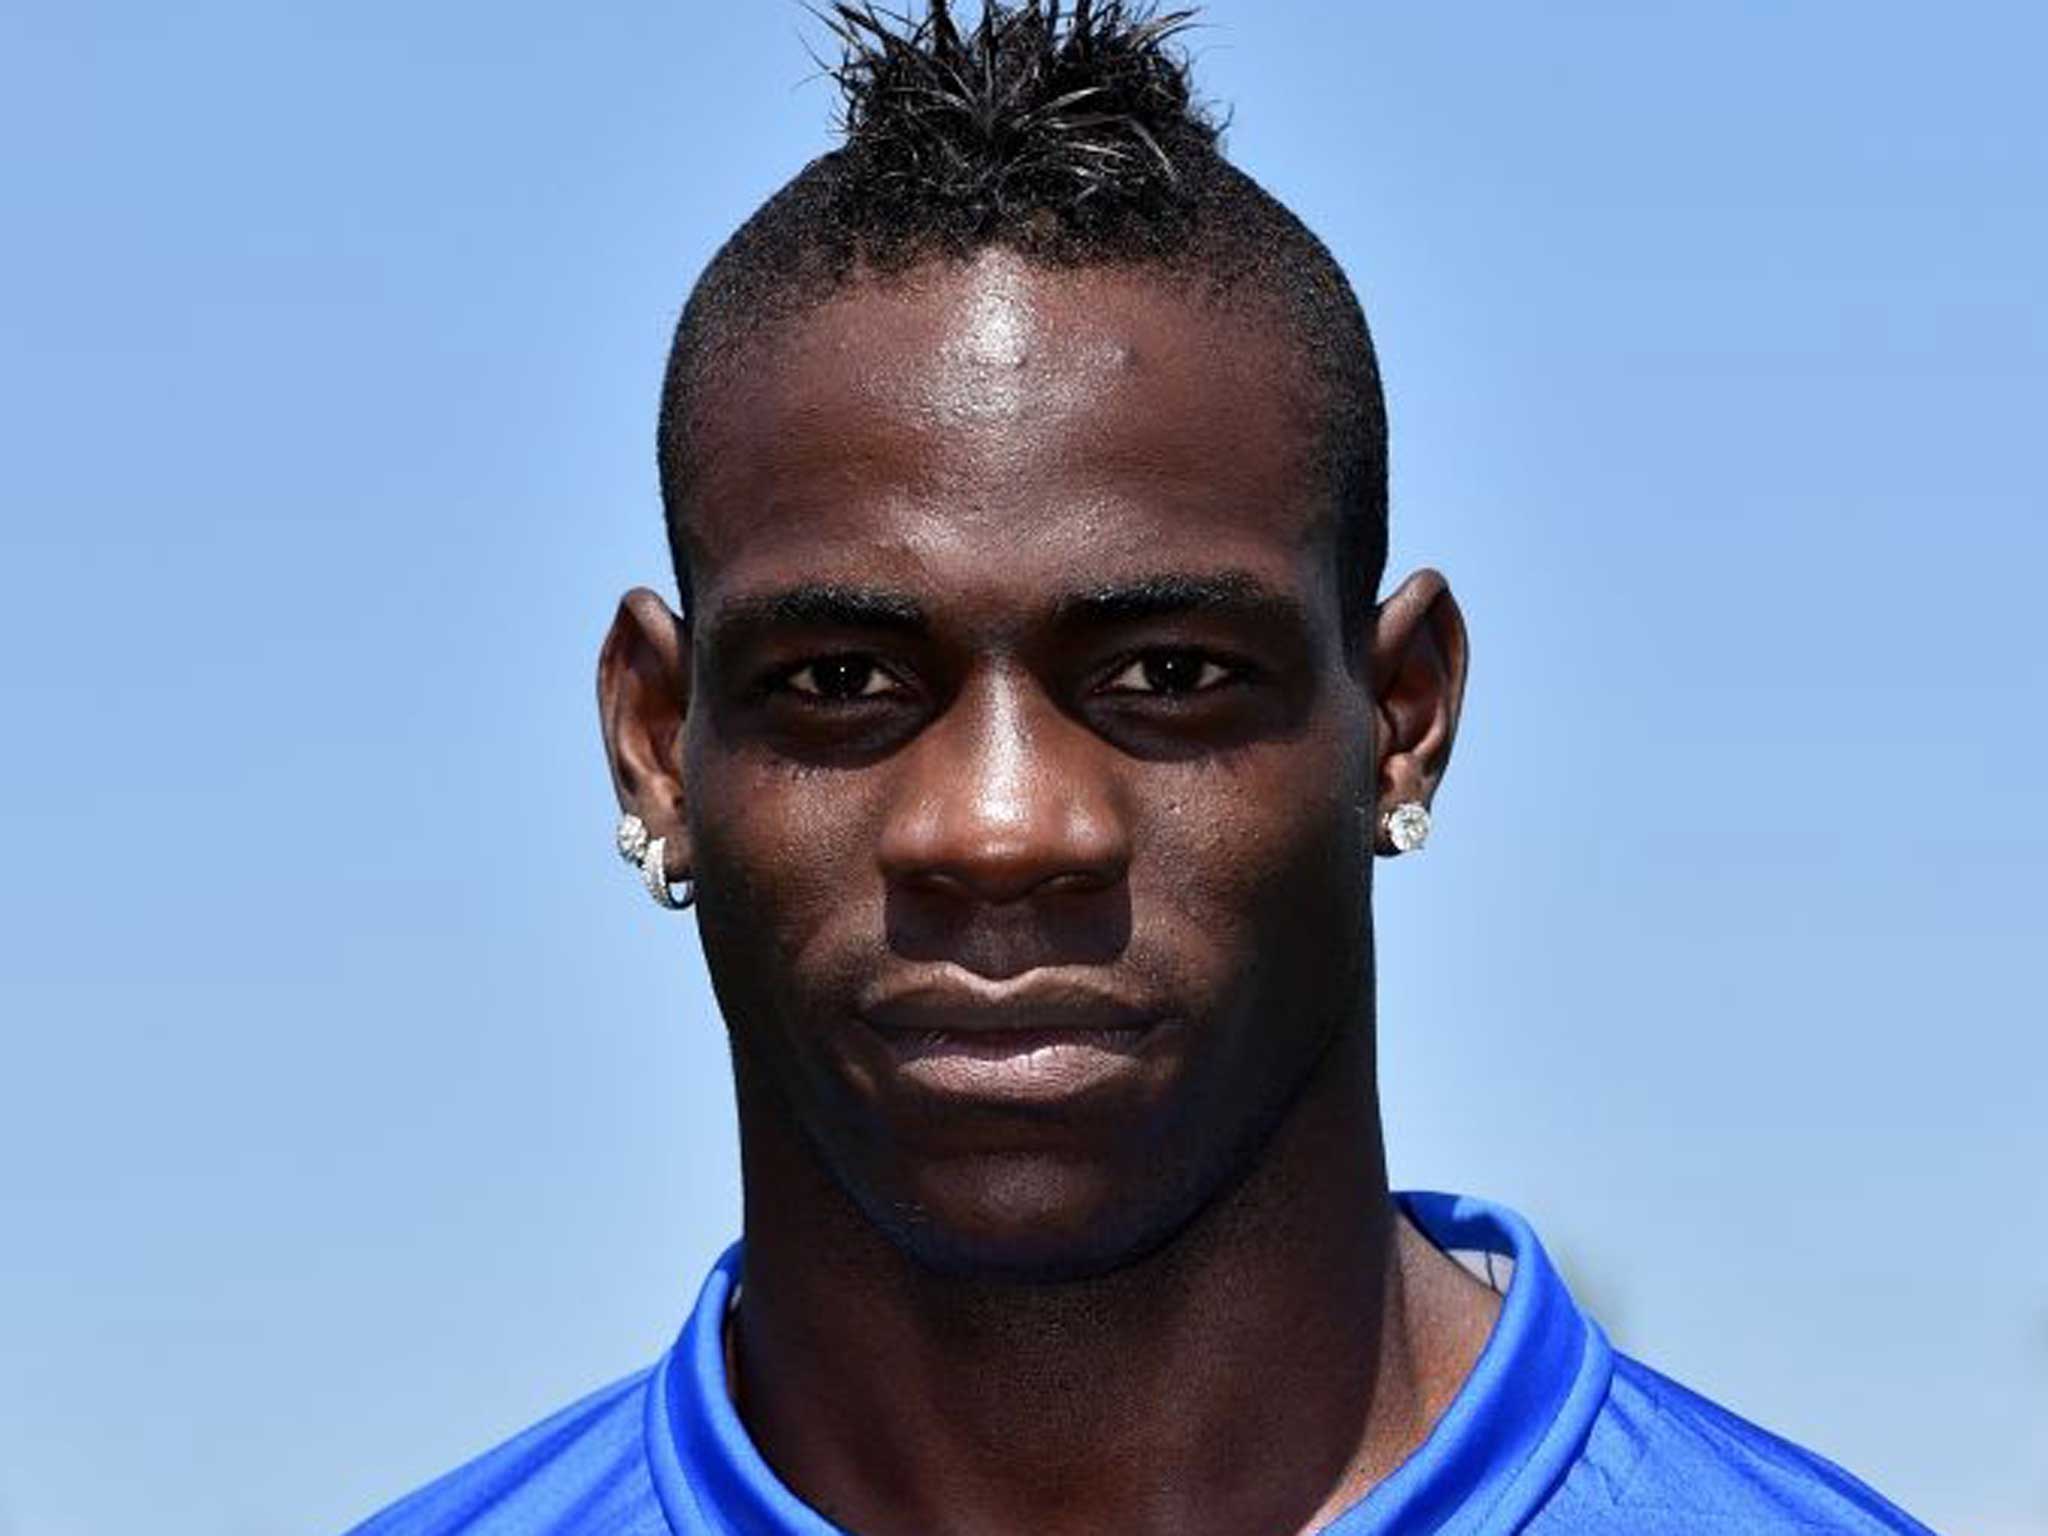 Balotelli of Italy poses during a portrait session